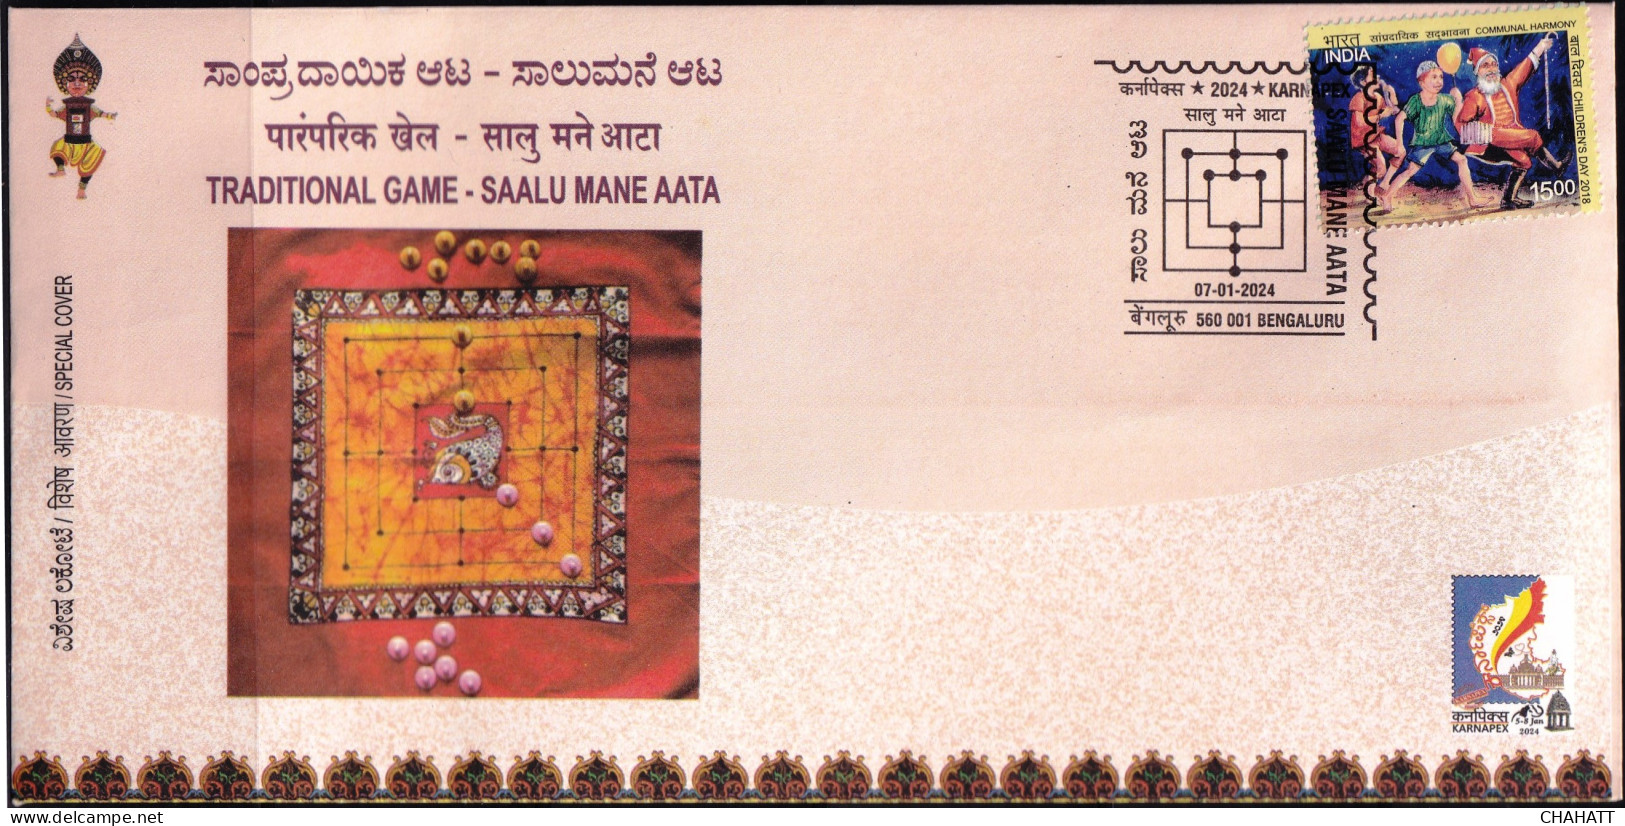 TRADITIONAL GAMES OF INDIA-  BOARD GAME- SAALU MANE AATA PICTORIAL CANCEL-SPECIAL COVER-INDIA POST-BX4-30 - Sin Clasificación